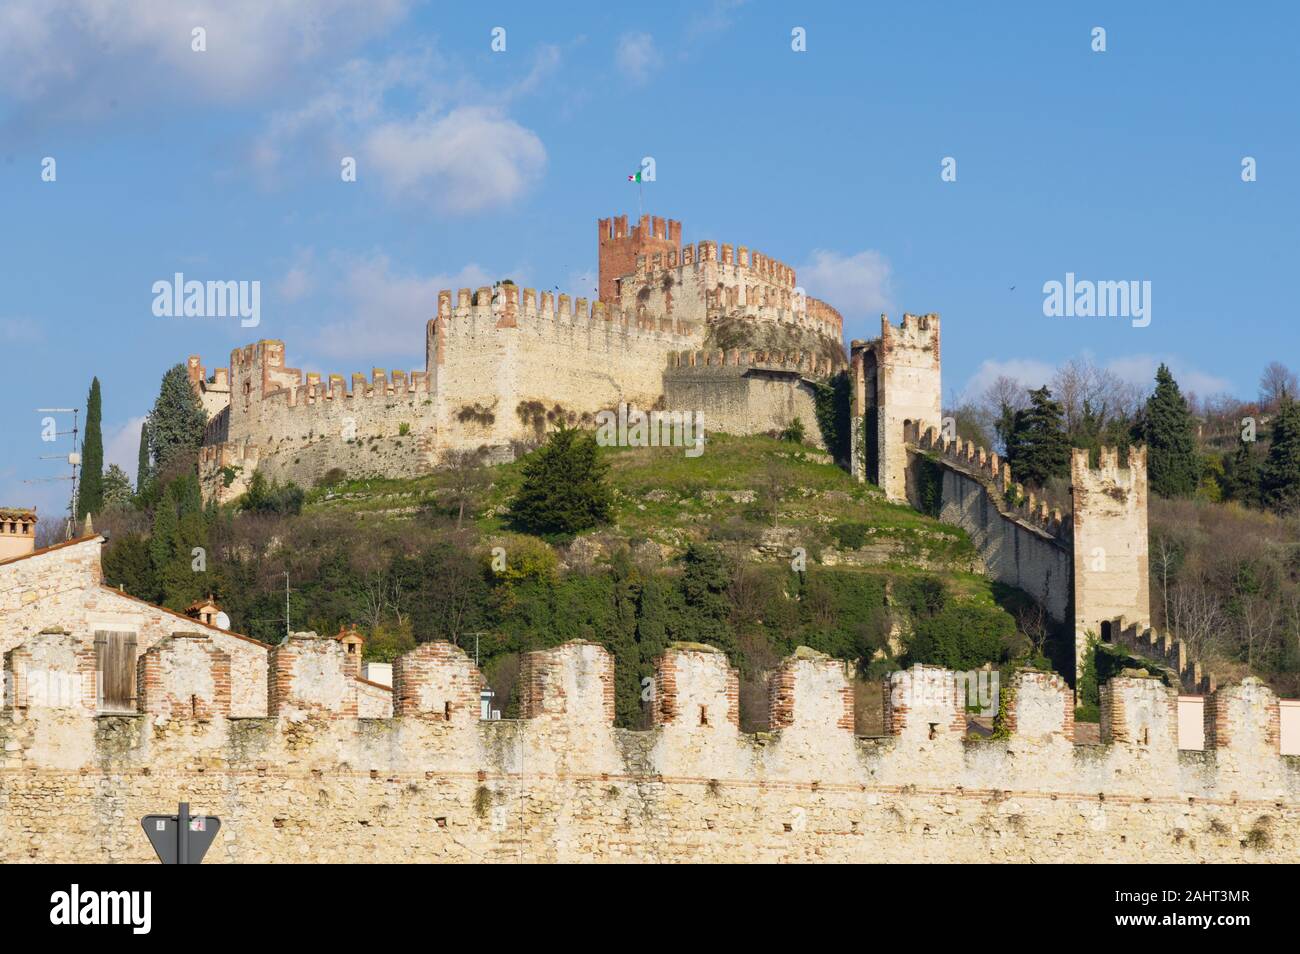 The medieval castle of Soave, near Verona in Italy, built in the XIII century on a hill and surrounded by imposing walls Stock Photo